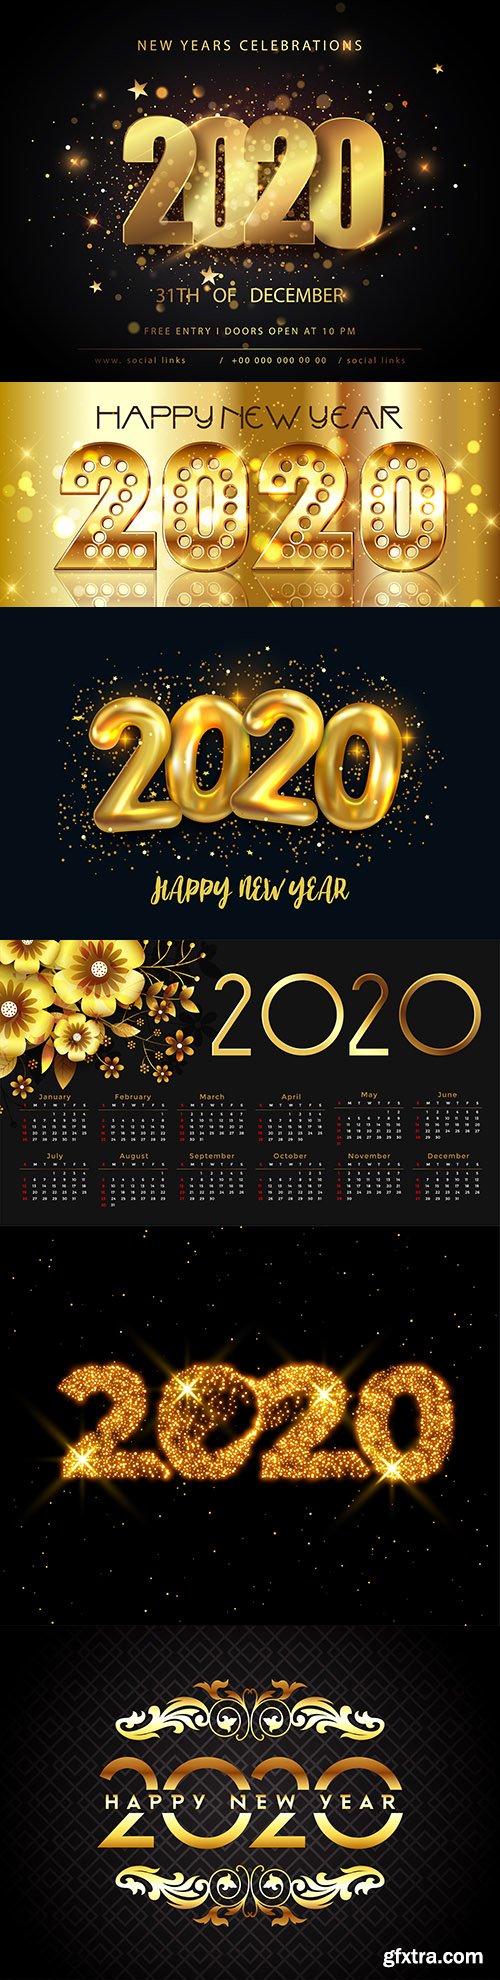 New Year and Christmas decorative 2020 illustration 15